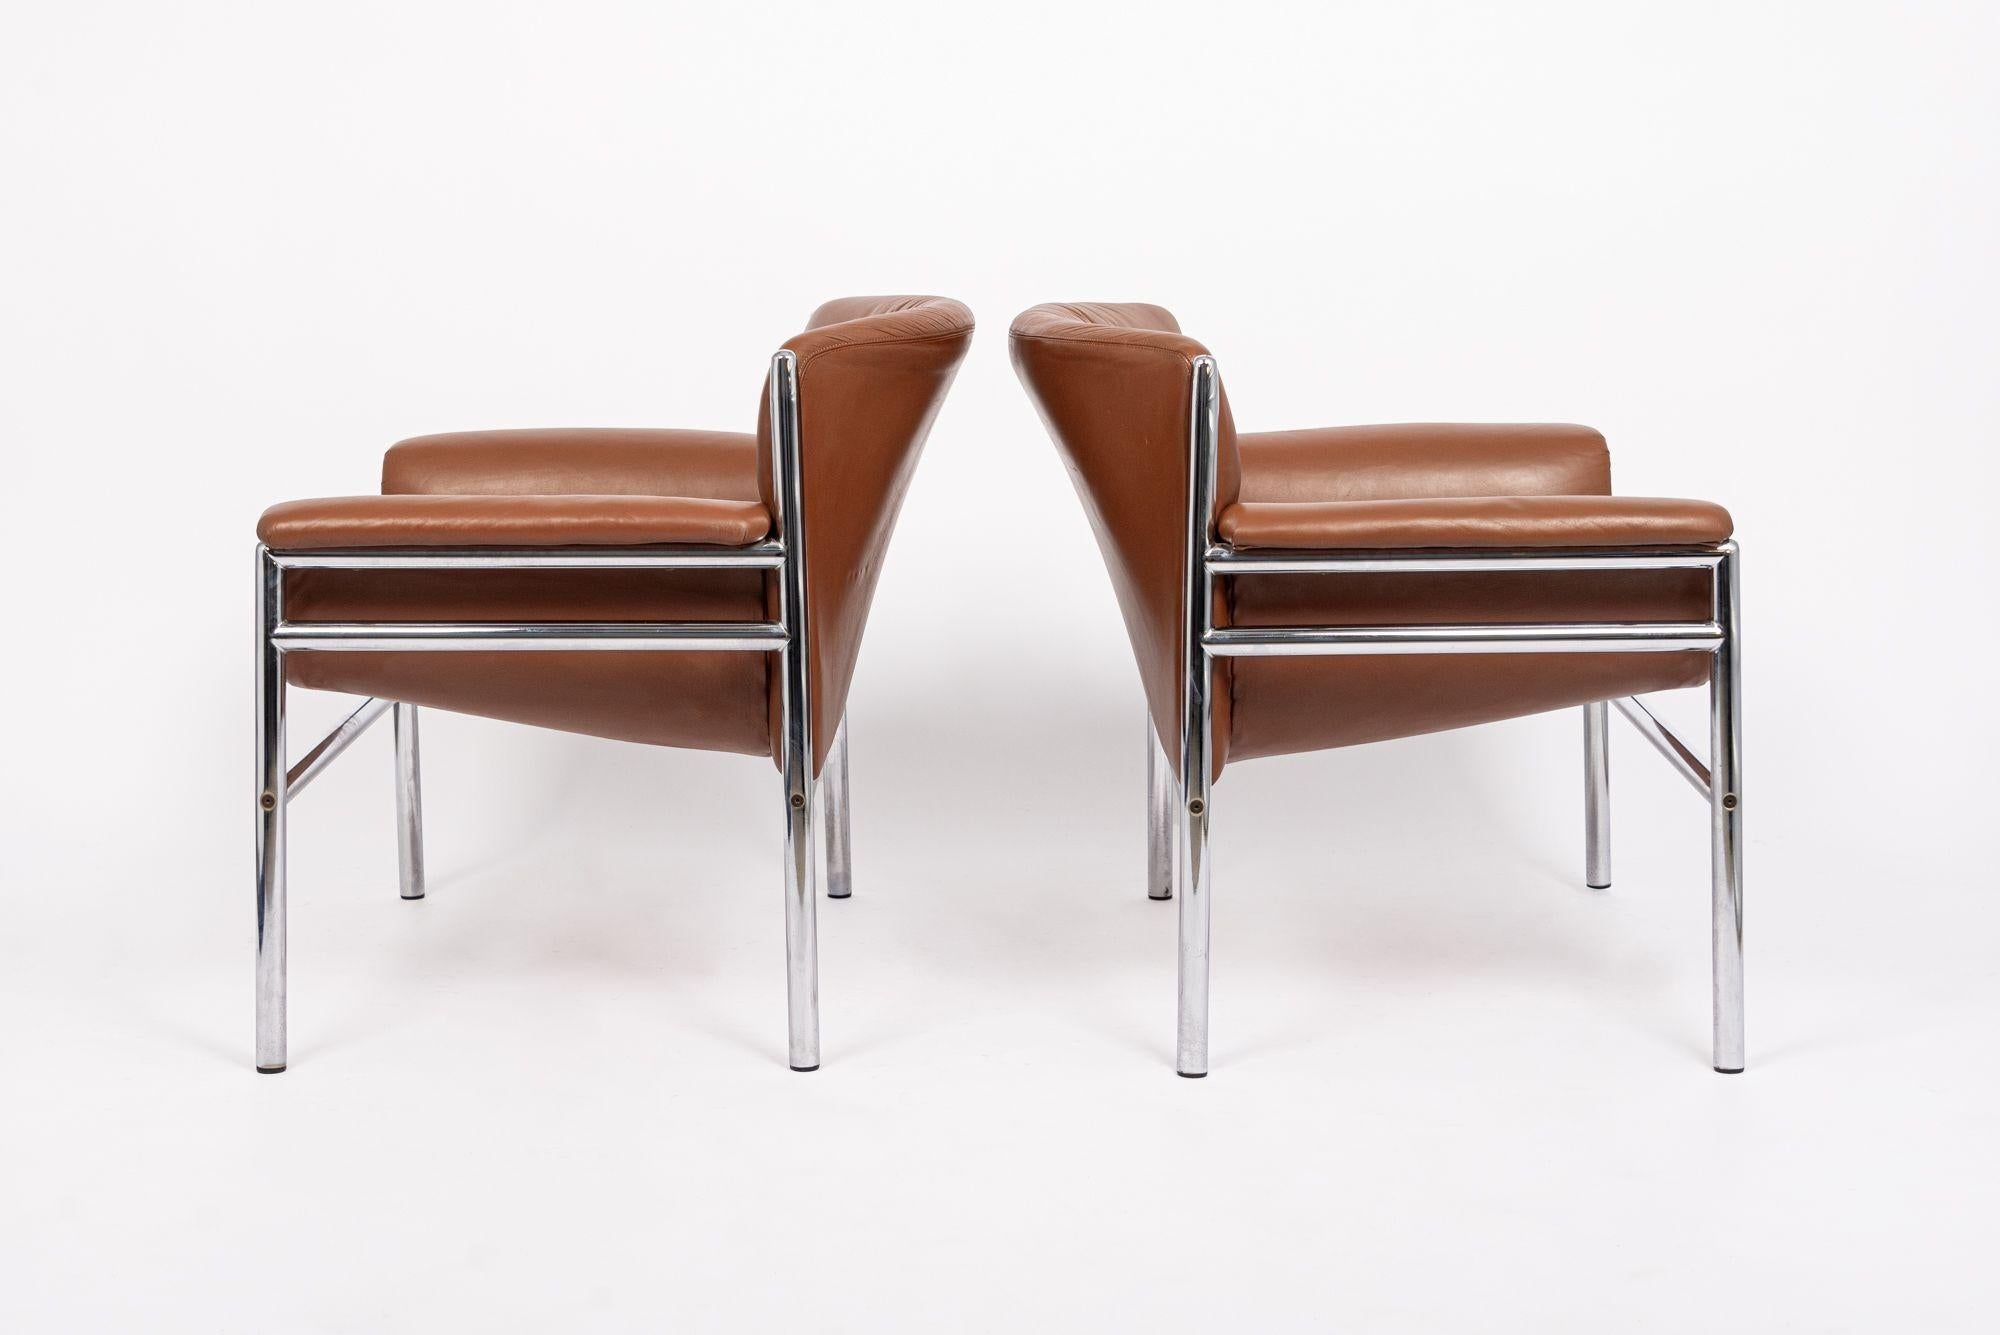 American Mid Century Caramel Brown Leather Lounge Chairs by Stendig 1960s For Sale